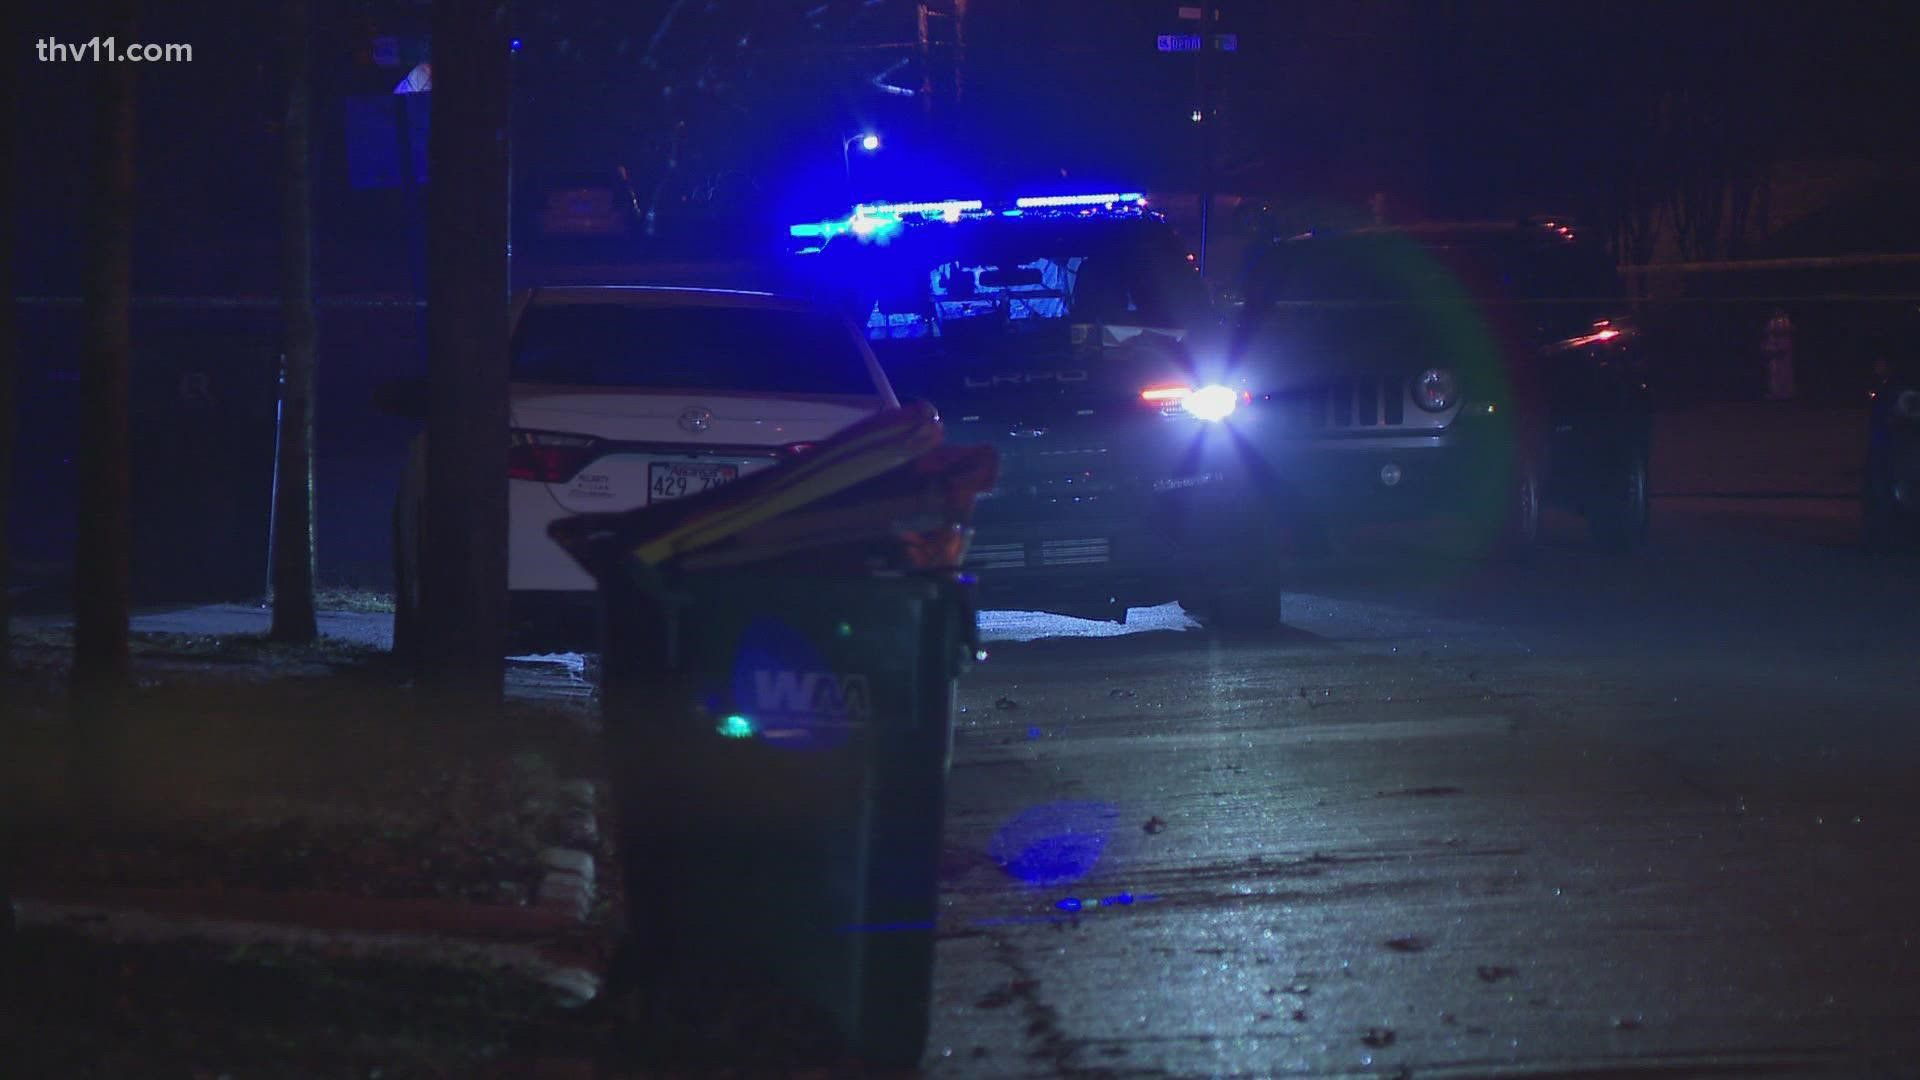 The Little Rock Police Department announced that two officers are now on administrative leave after a man was fatally shot during an overnight incident on W. 18th.